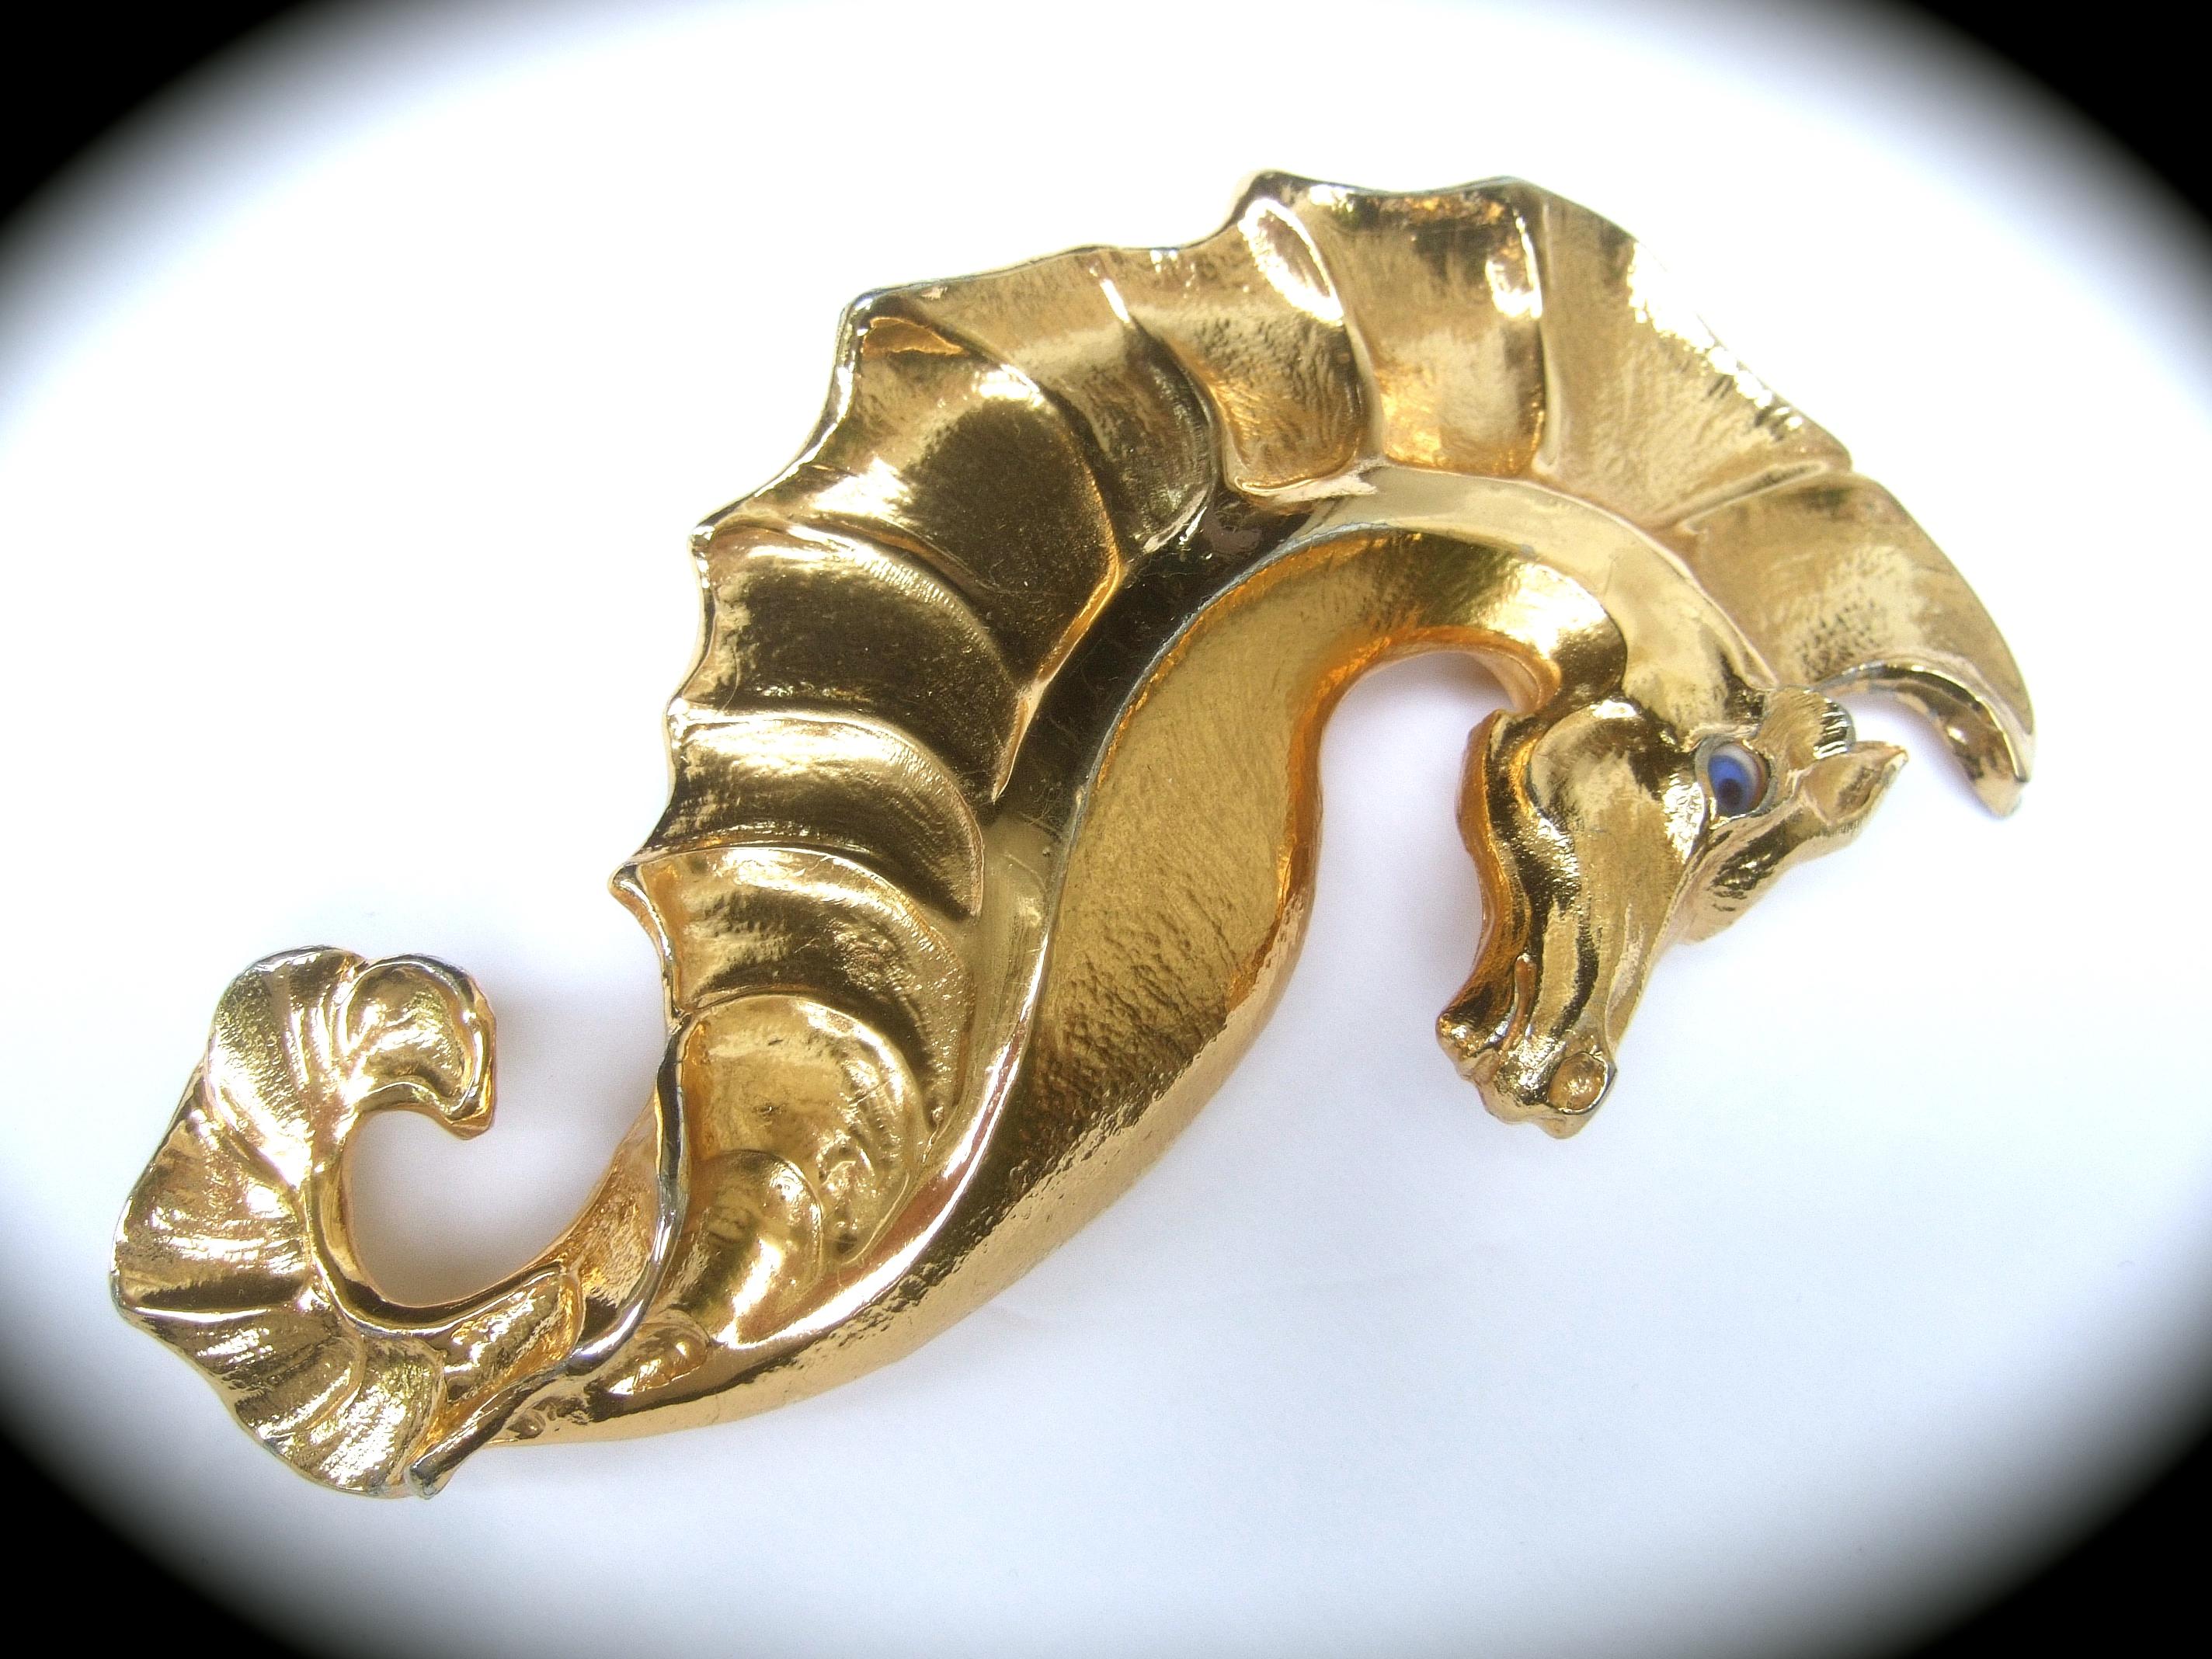 Christopher Ross Rare massive 24k gold plated seahorse artisan belt buckle c 1980s 
The incredible huge scale stylized seahorse belt buckle is sheathed in luminous 24k gold plating
Embellished with a blue glass eye

The seahorse buckle when mounted